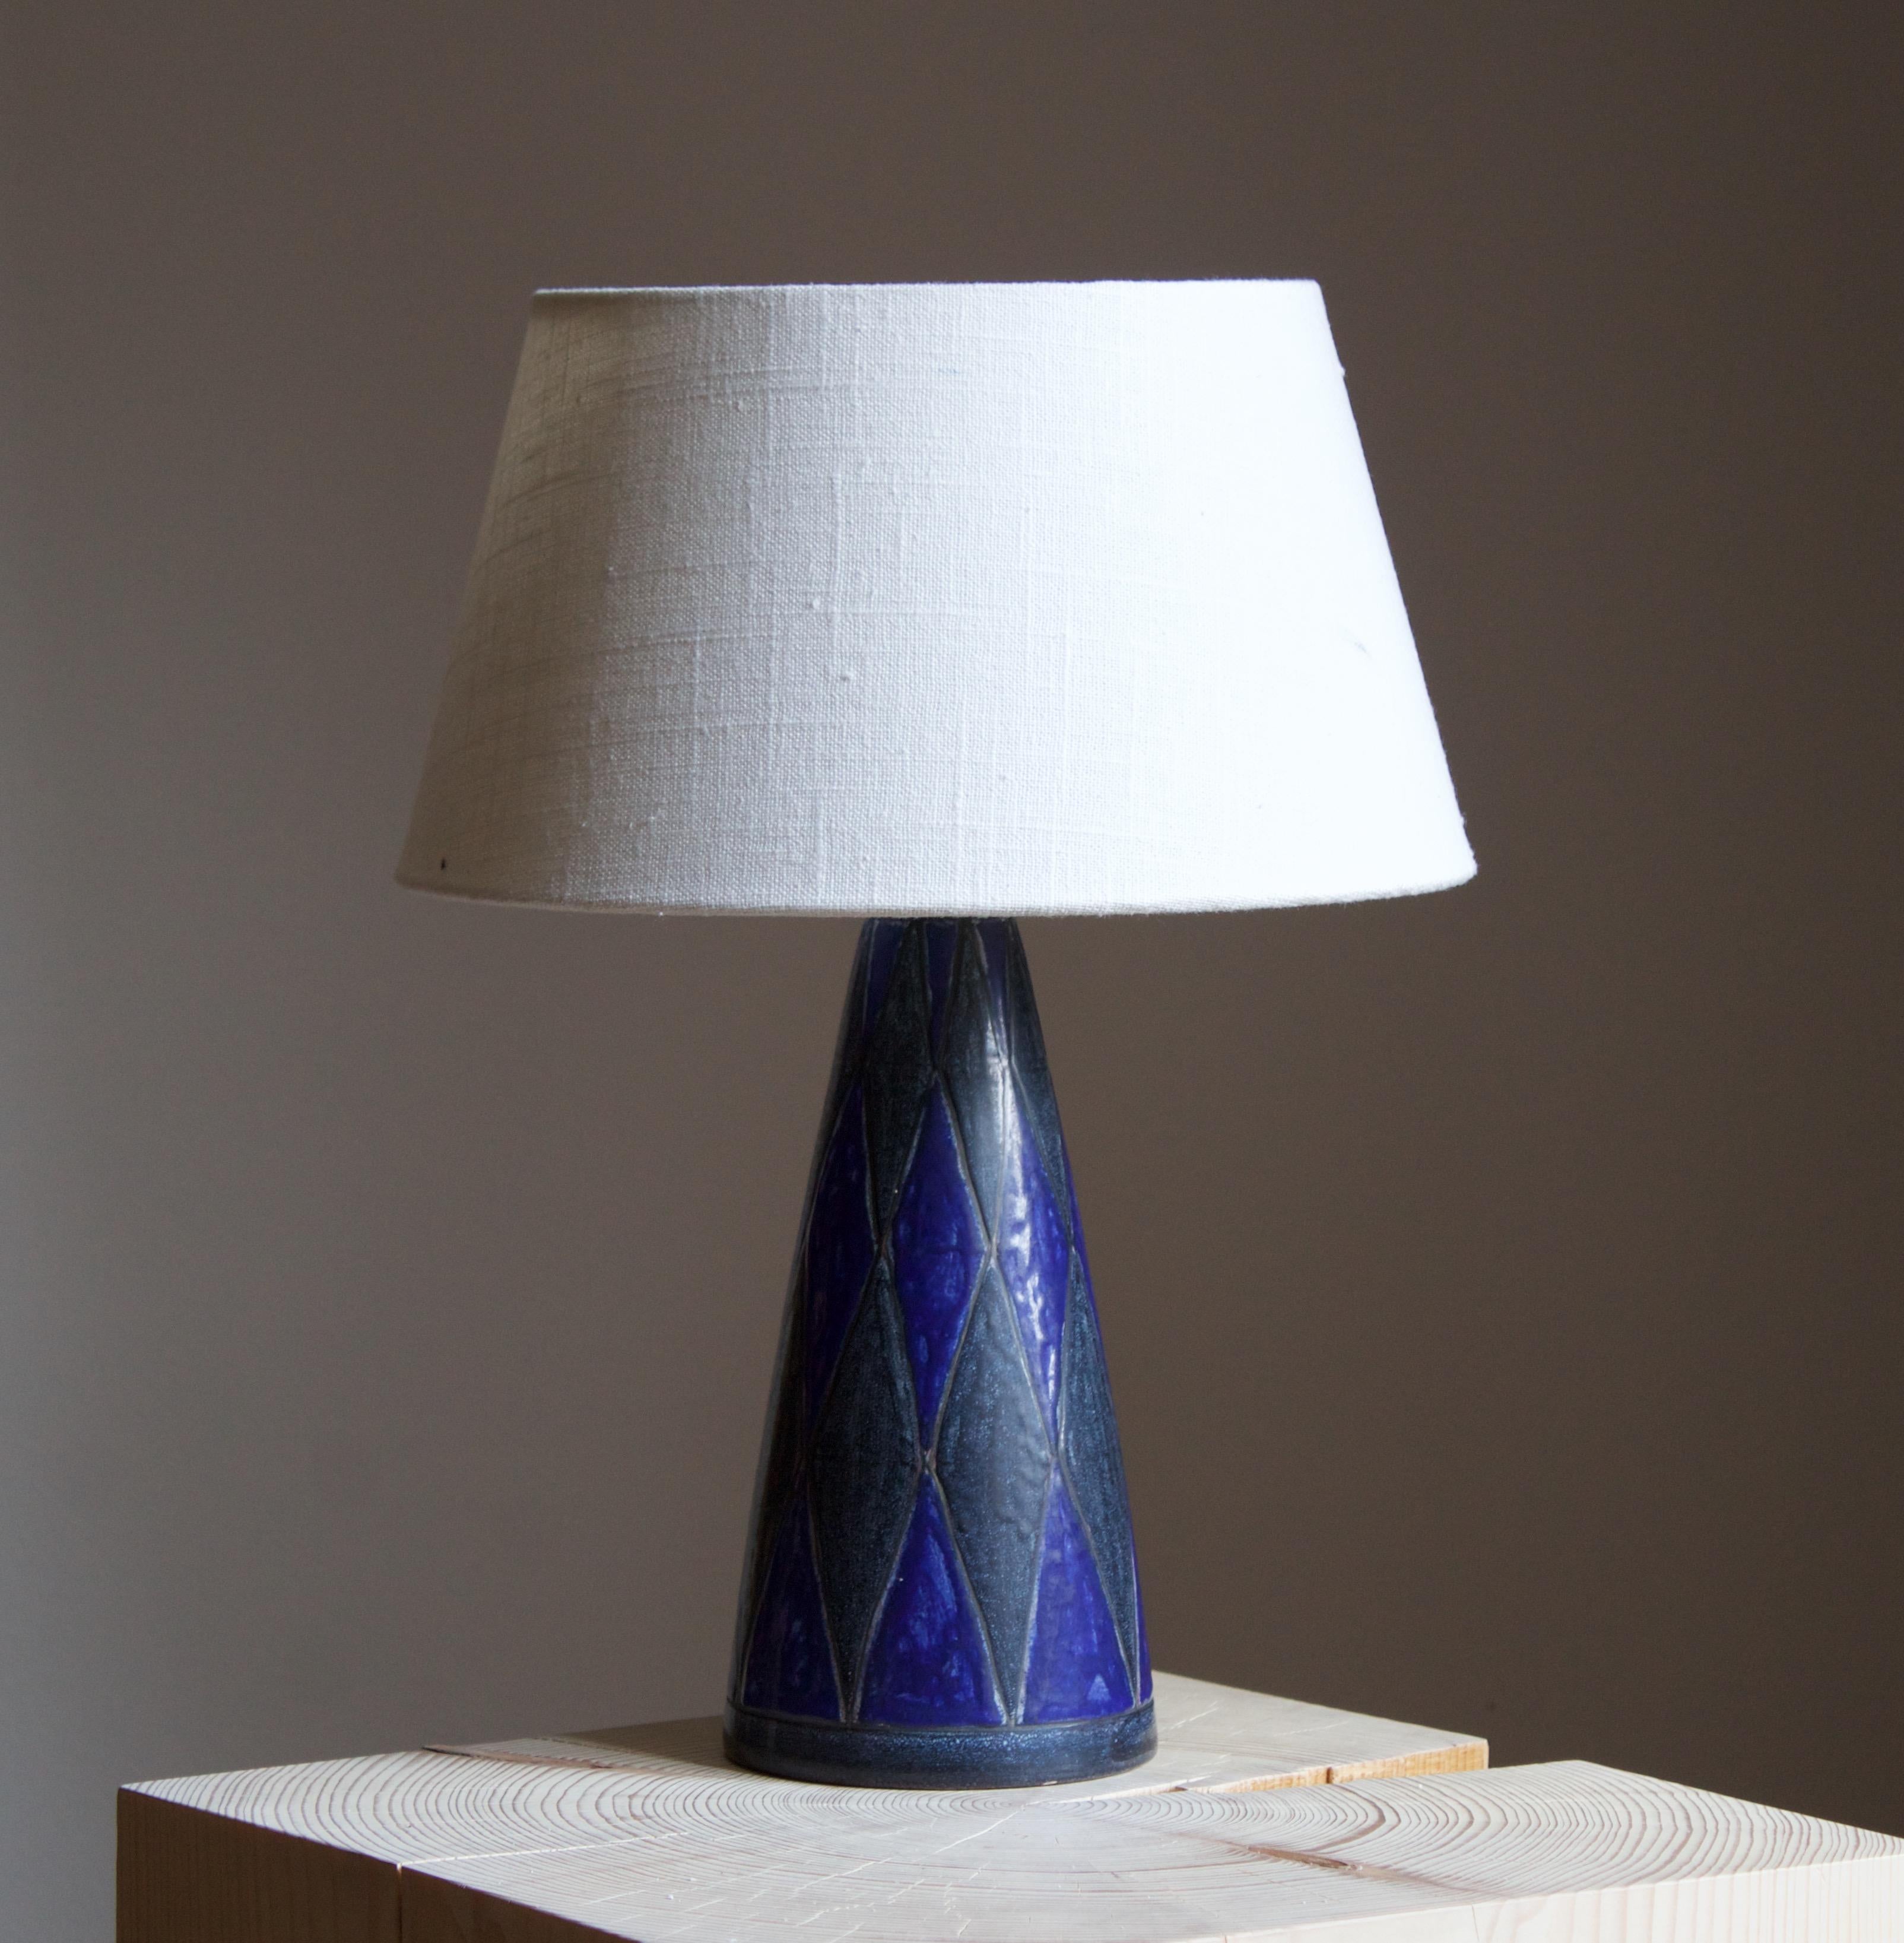 A table lamp designed by Marianne Starck produced by Michael Andersen Keramik. Signed and stamped

Purchase excludes lampshade. Stated measurements excluding lampshade. Height includes socket.

Other ceramicists of the period include Axel Salto,